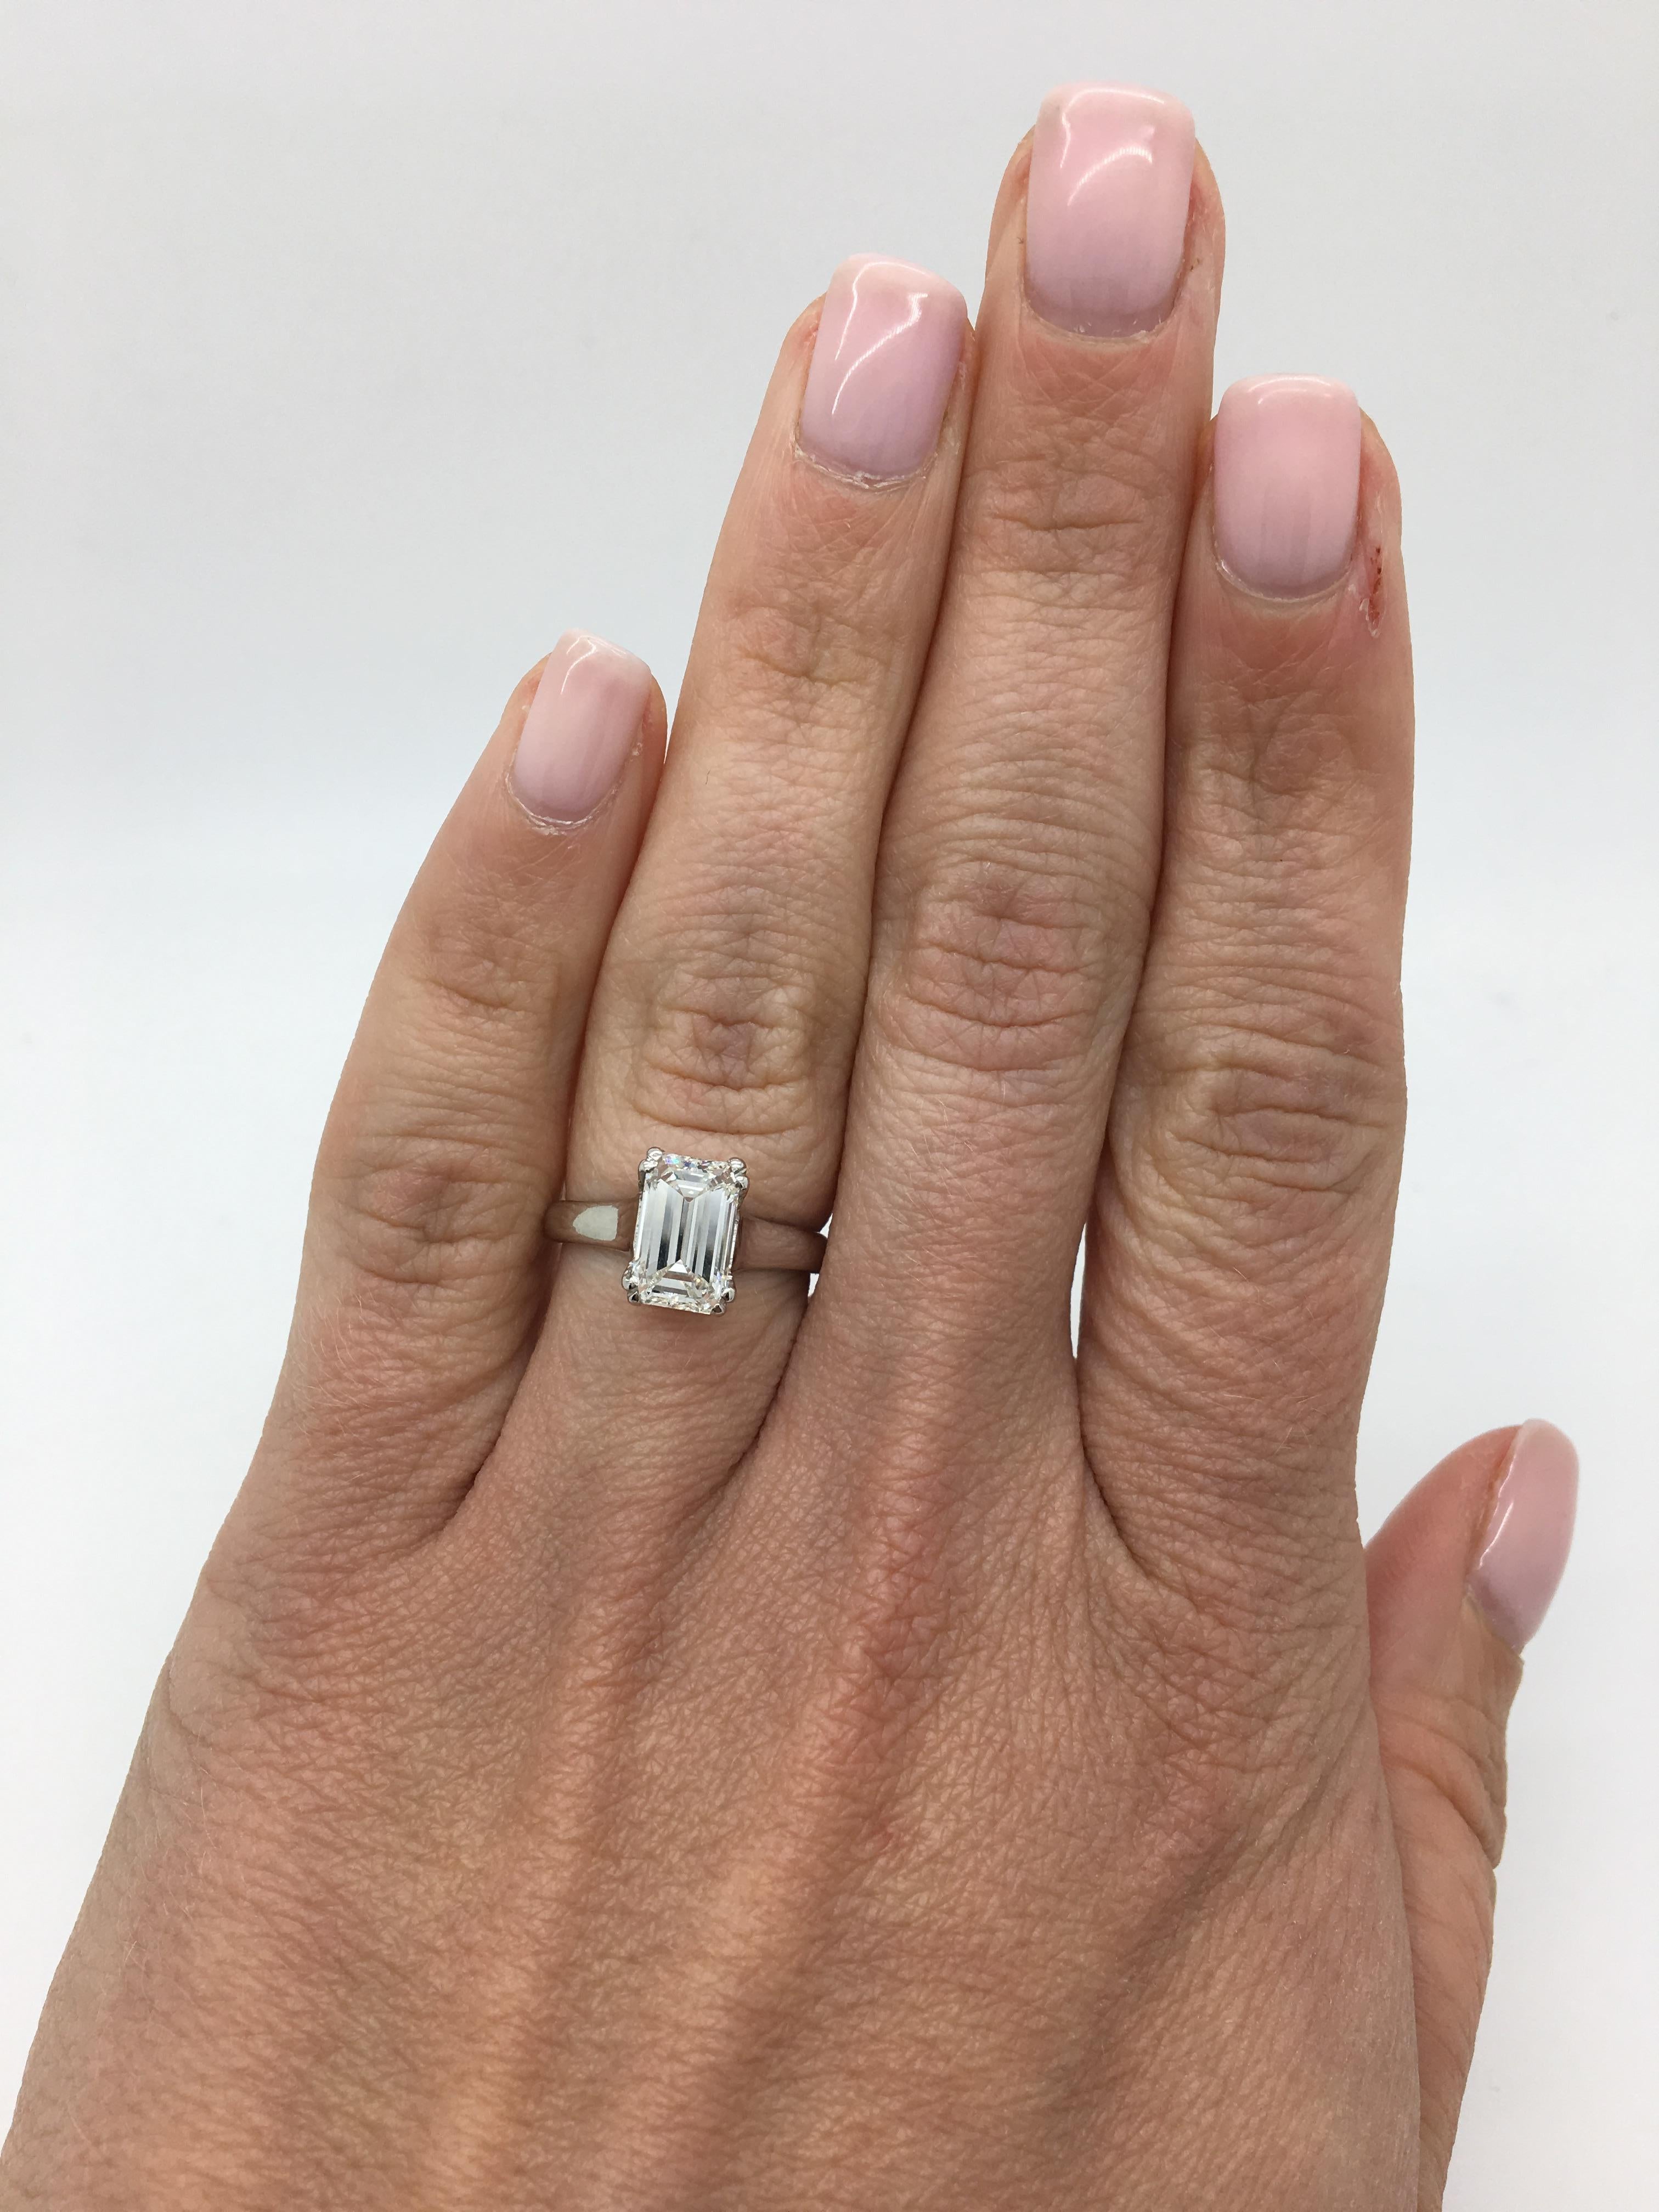 Timeless 2.00CT Emerald Cut Diamond Solitaire engagement ring with double prongs. 

Diamond Carat Weight: 2.00CT
Diamond Cut: Emerald Cut
Diamond Color: I-J 
Diamond Clarity:  SI2
Metal: Platinum
Ring Size: 5.5
Marked/Tested: Stamped 